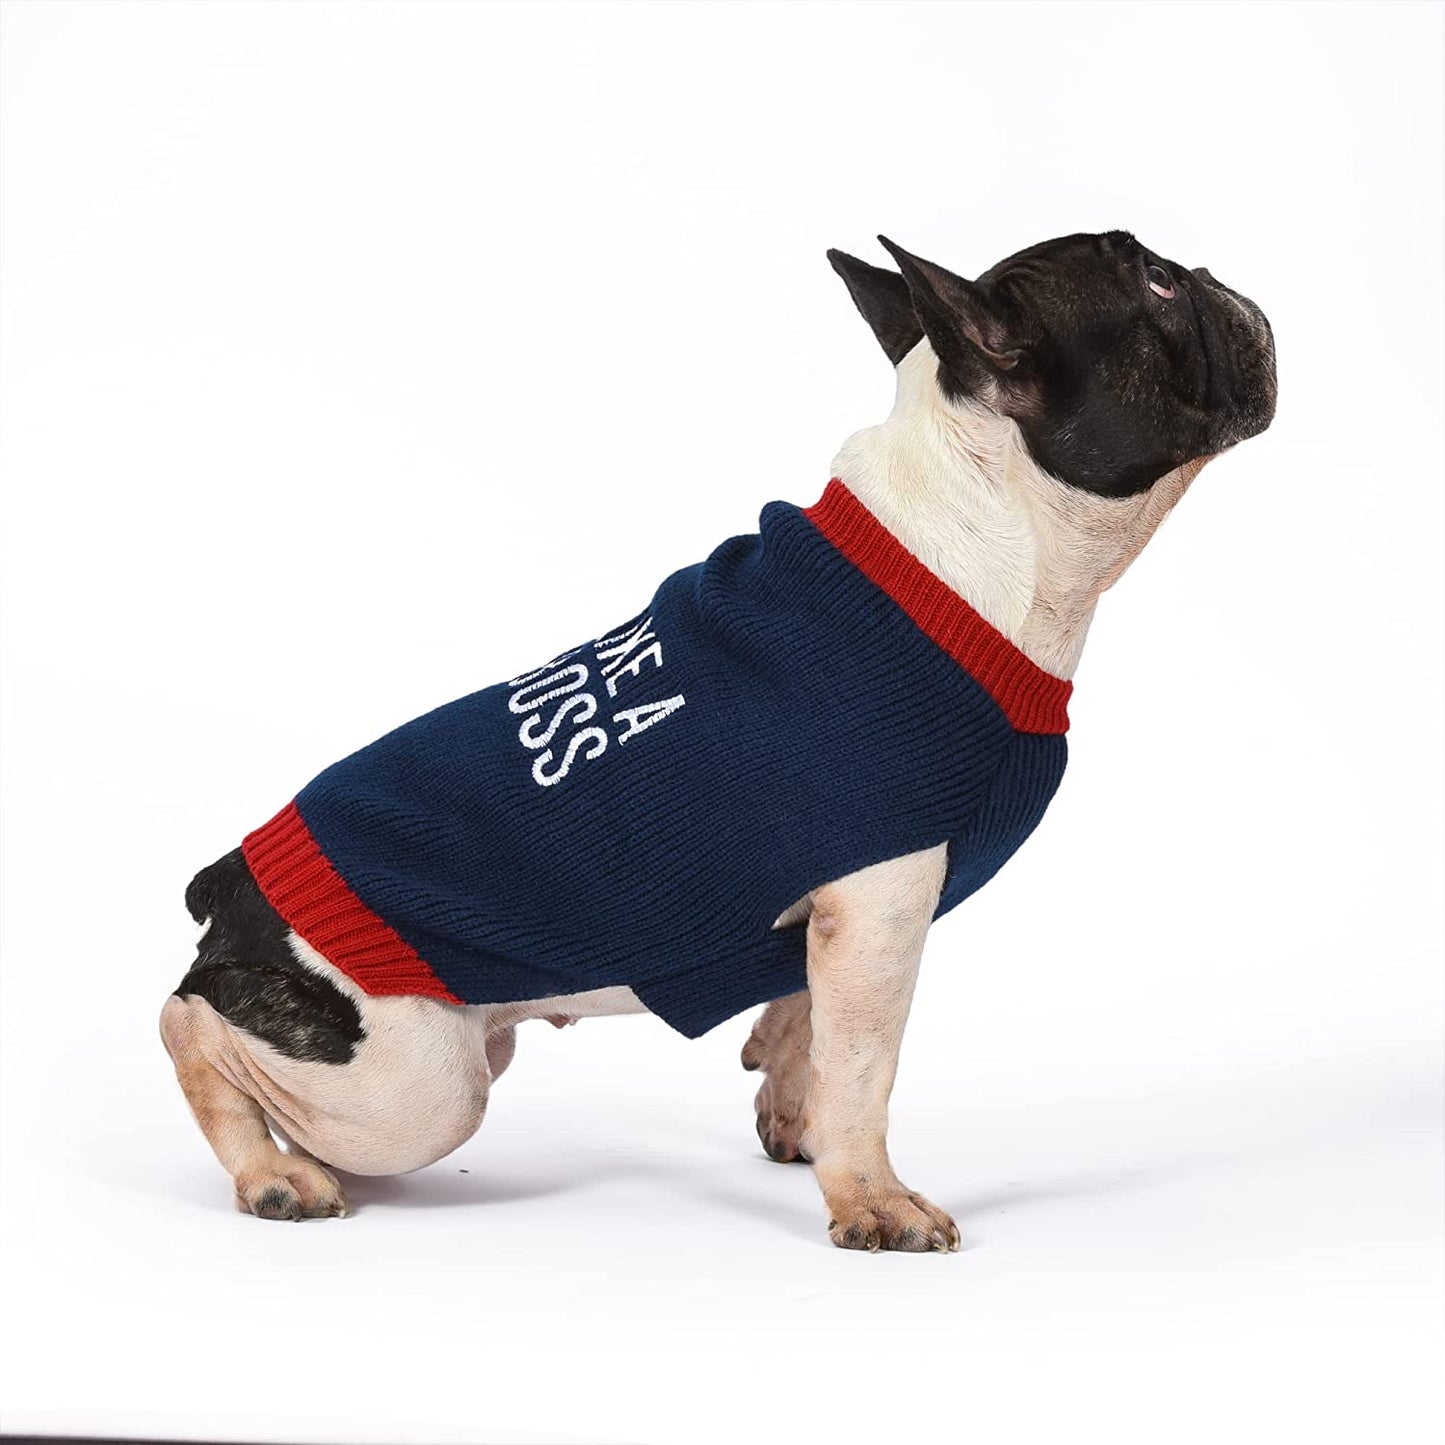 Peanuts for Pets Snoopy "Like a Boss" Dog Sweater, Medium | Soft and Comfortable Dog Apparel Dog Clothing Dog Shirt | Peanuts Snoopy Medium Dog Sweater, Medium Dog Shirt for Medium Dogs Animals & Pet Supplies > Pet Supplies > Dog Supplies > Dog Apparel Fetch for Pets   